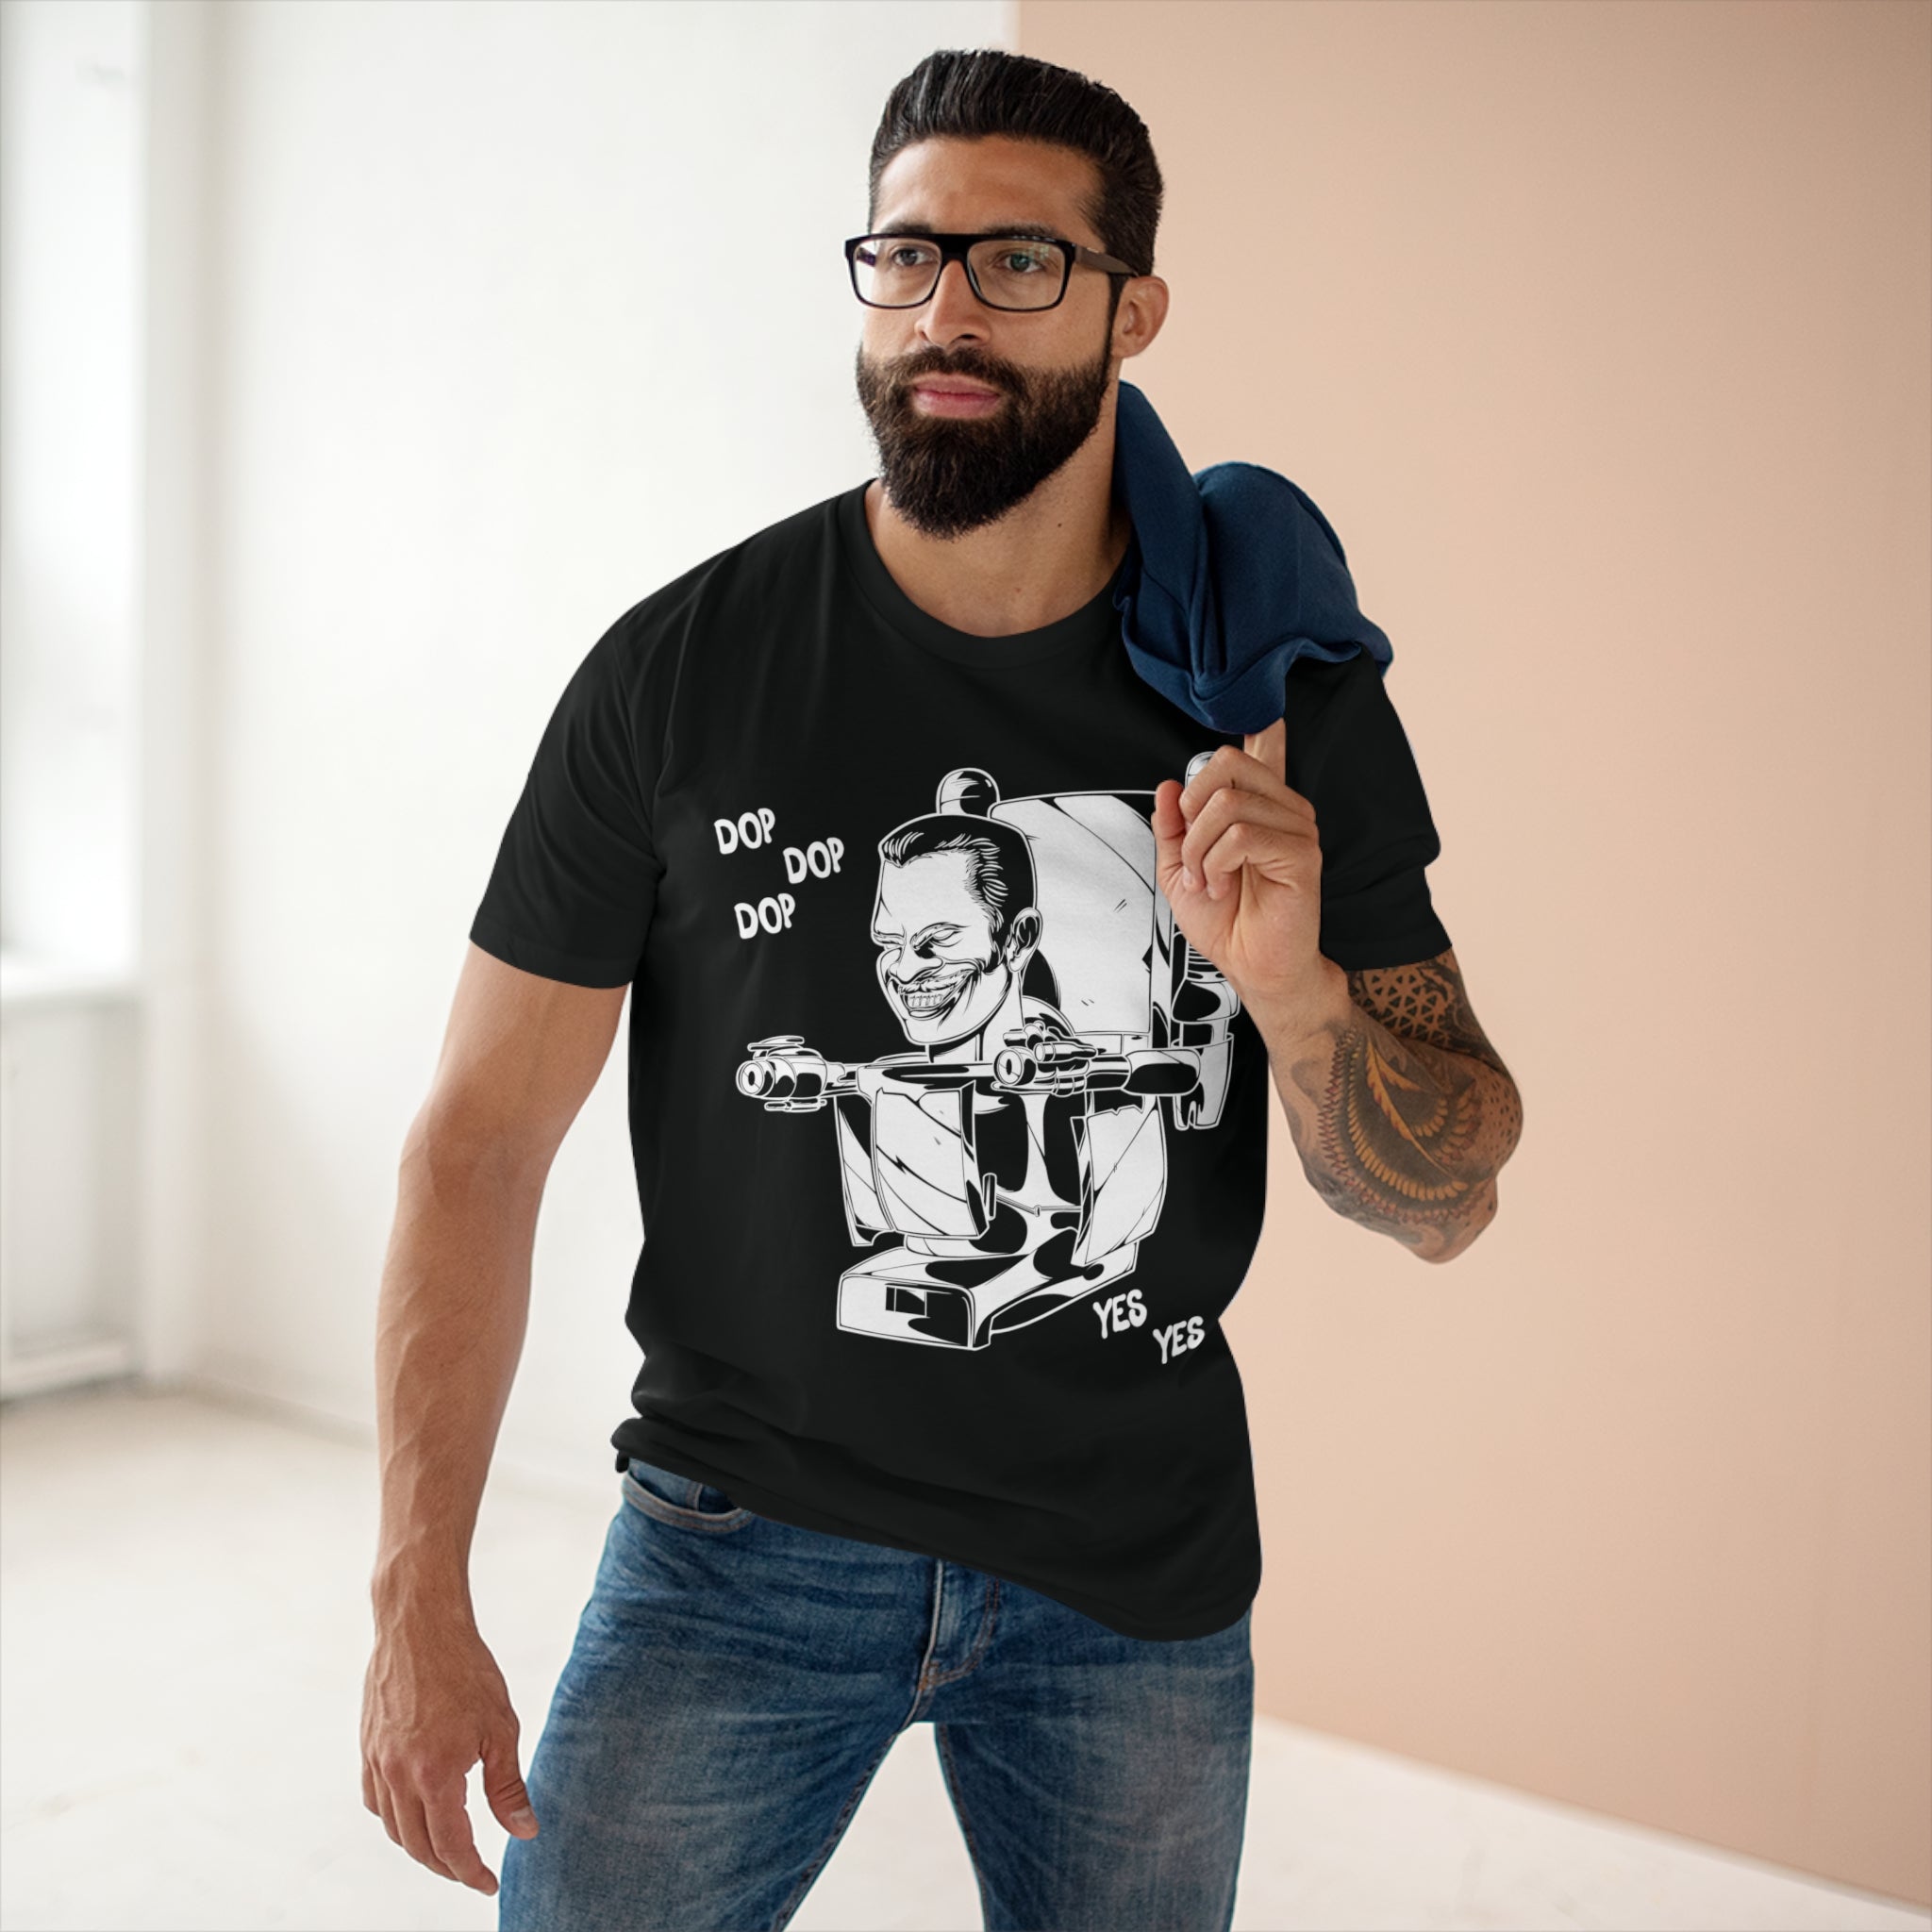 Black tee with minimalistic G Man pop art on male model with glasses in room